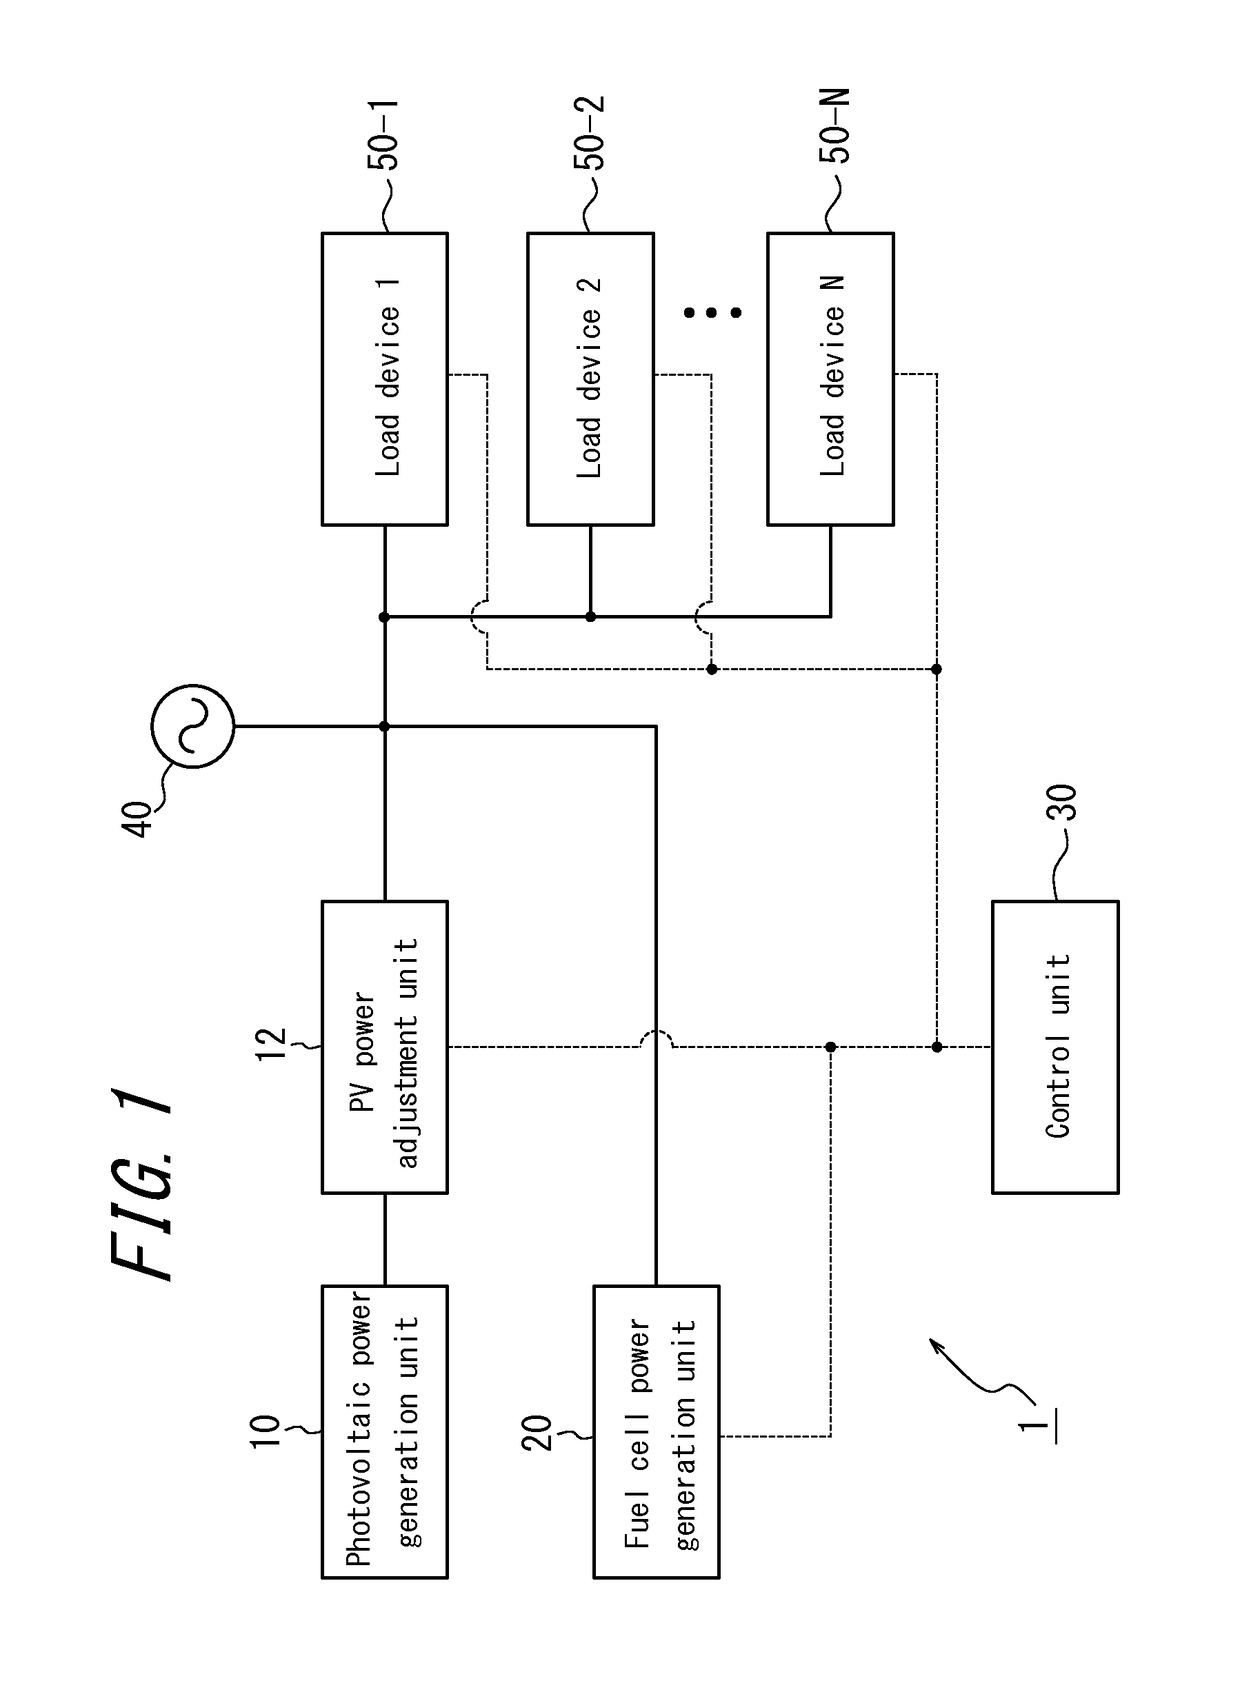 Energy control system, energy control device, and energy control method for prioritizing a power generation source based on the possibility of selling generated power